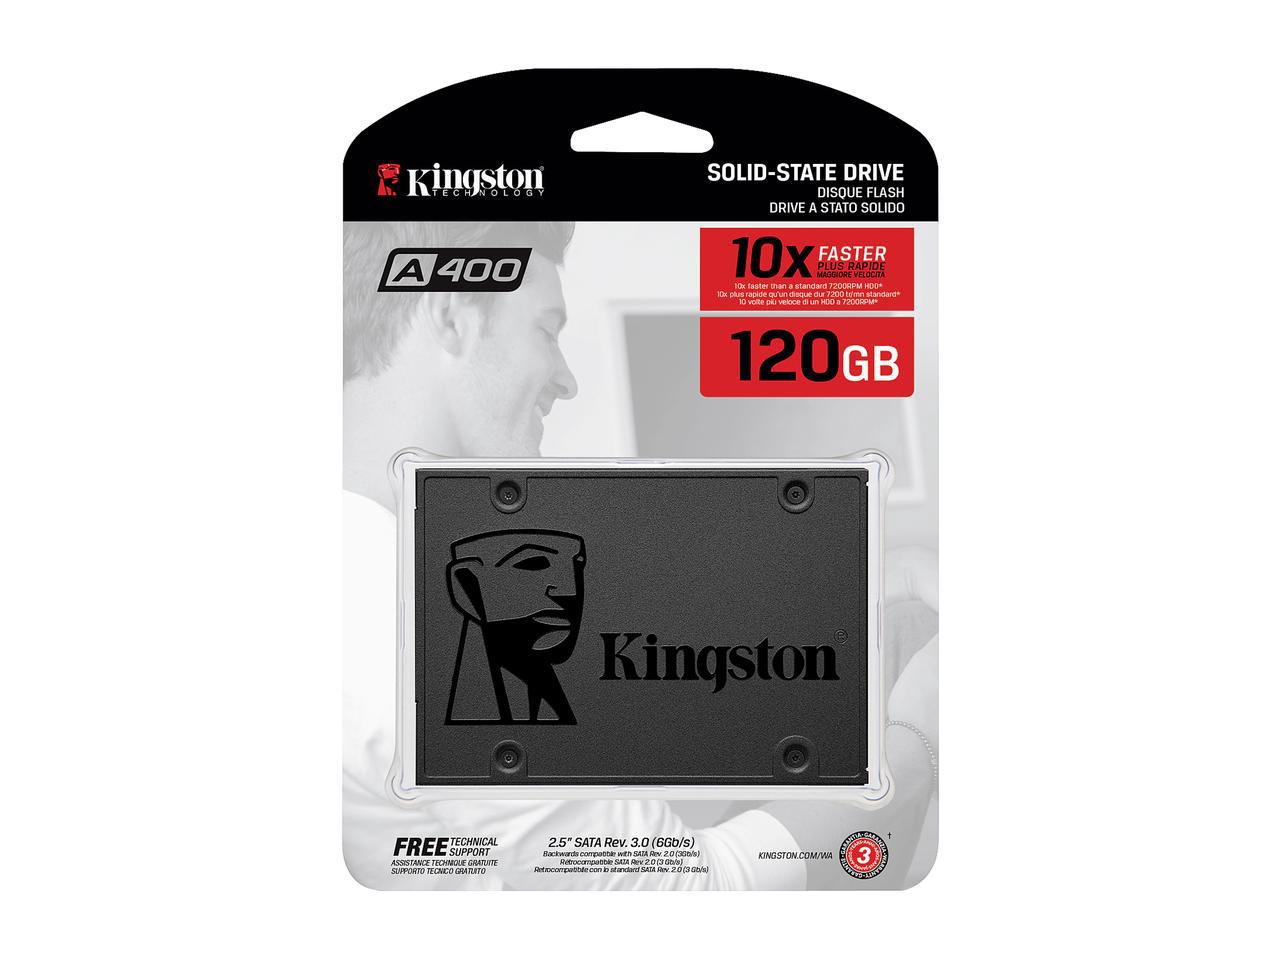 2017: Kingston A400 SSD Becomes The Entry-Level SATA Drive - Reviews